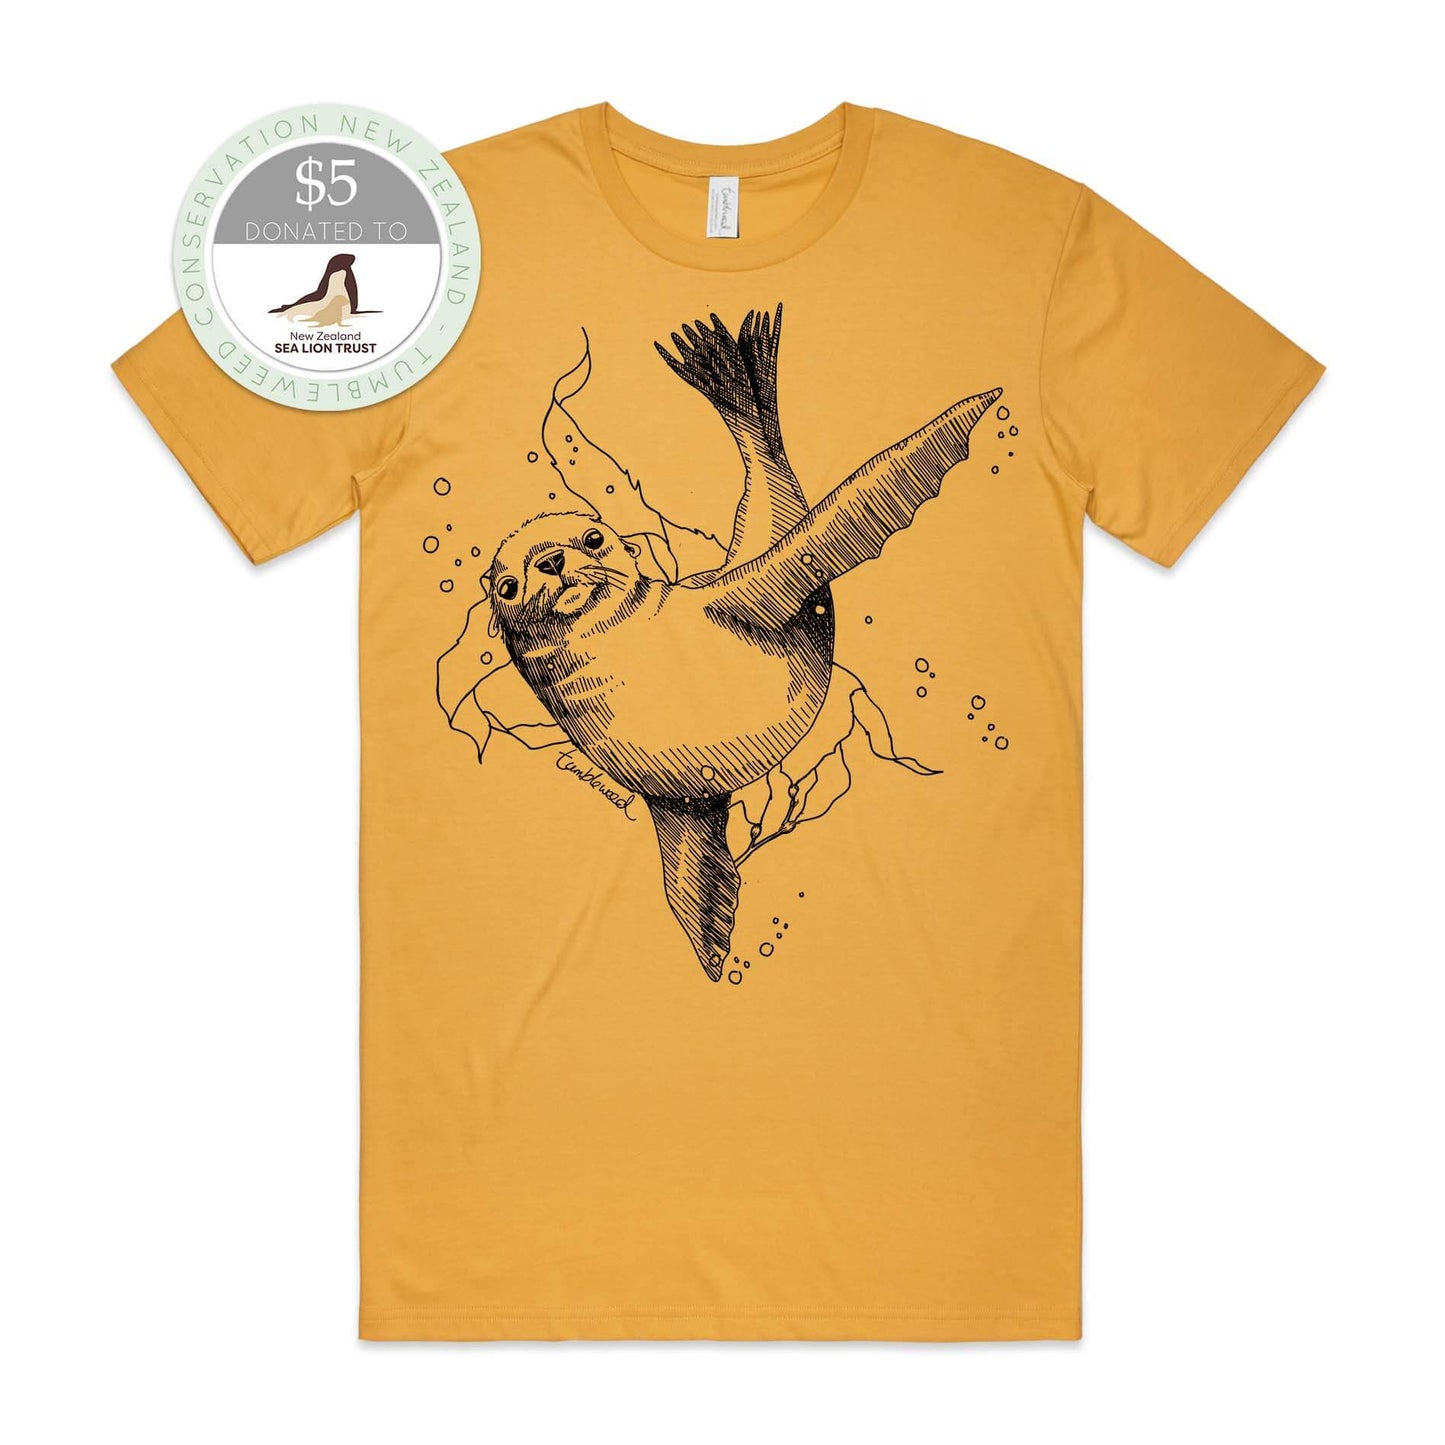 Sage, male t-shirt featuring a screen printed New Zealand sea lion design.